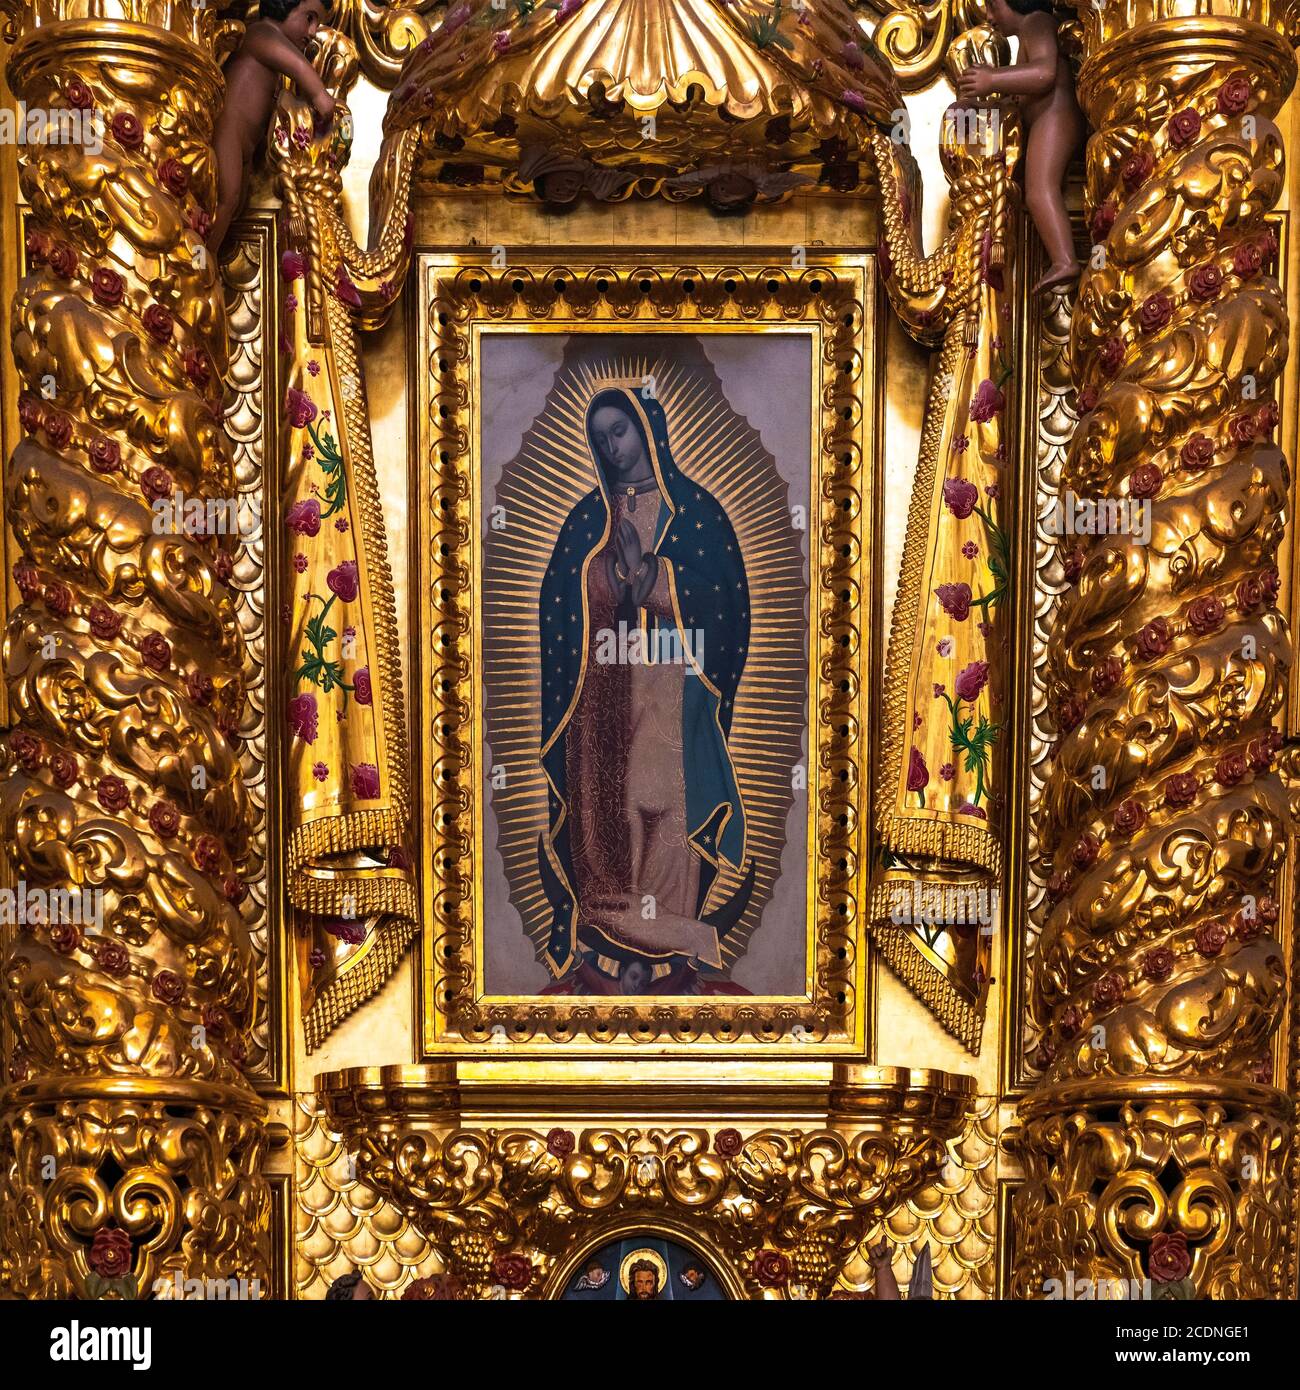 Painting of Our Lady of Guadalupe Virgin Mary in a gold leaf decoration altar in baroque style inside the Santo Domingo Cathedral, Oaxaca, Mexico. Stock Photo